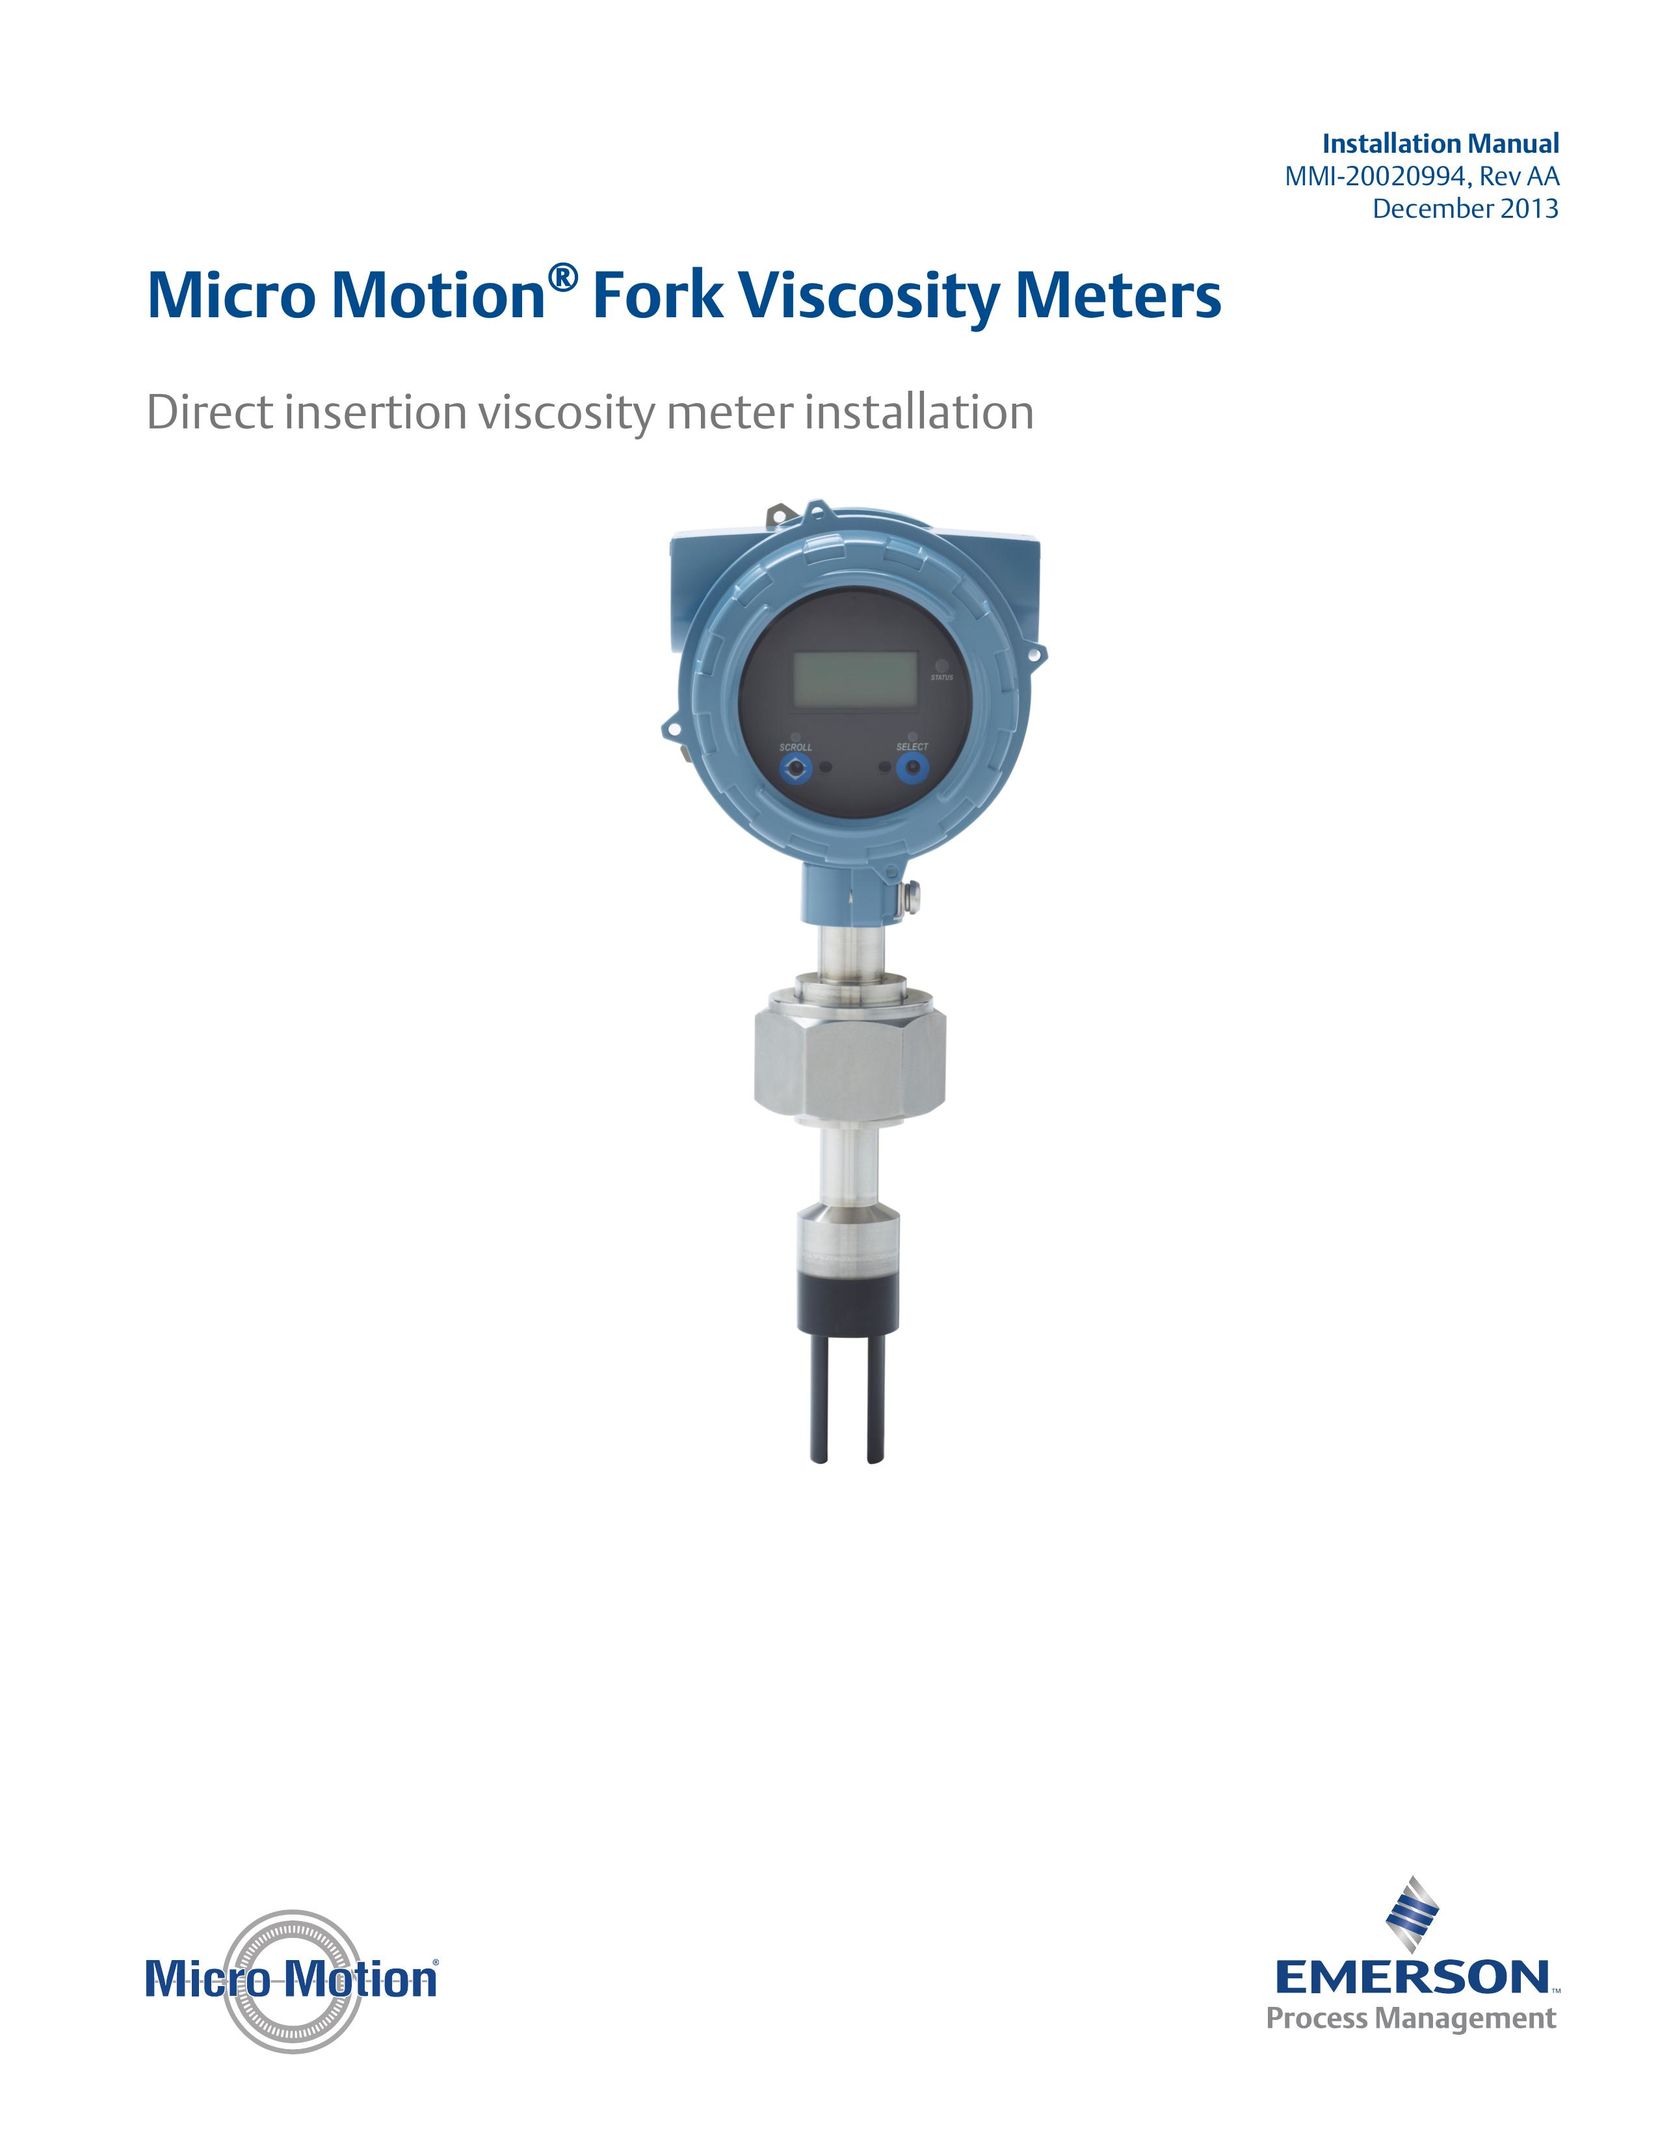 Emerson Micro Motion Fork Viscosity Meters TV Antenna User Manual